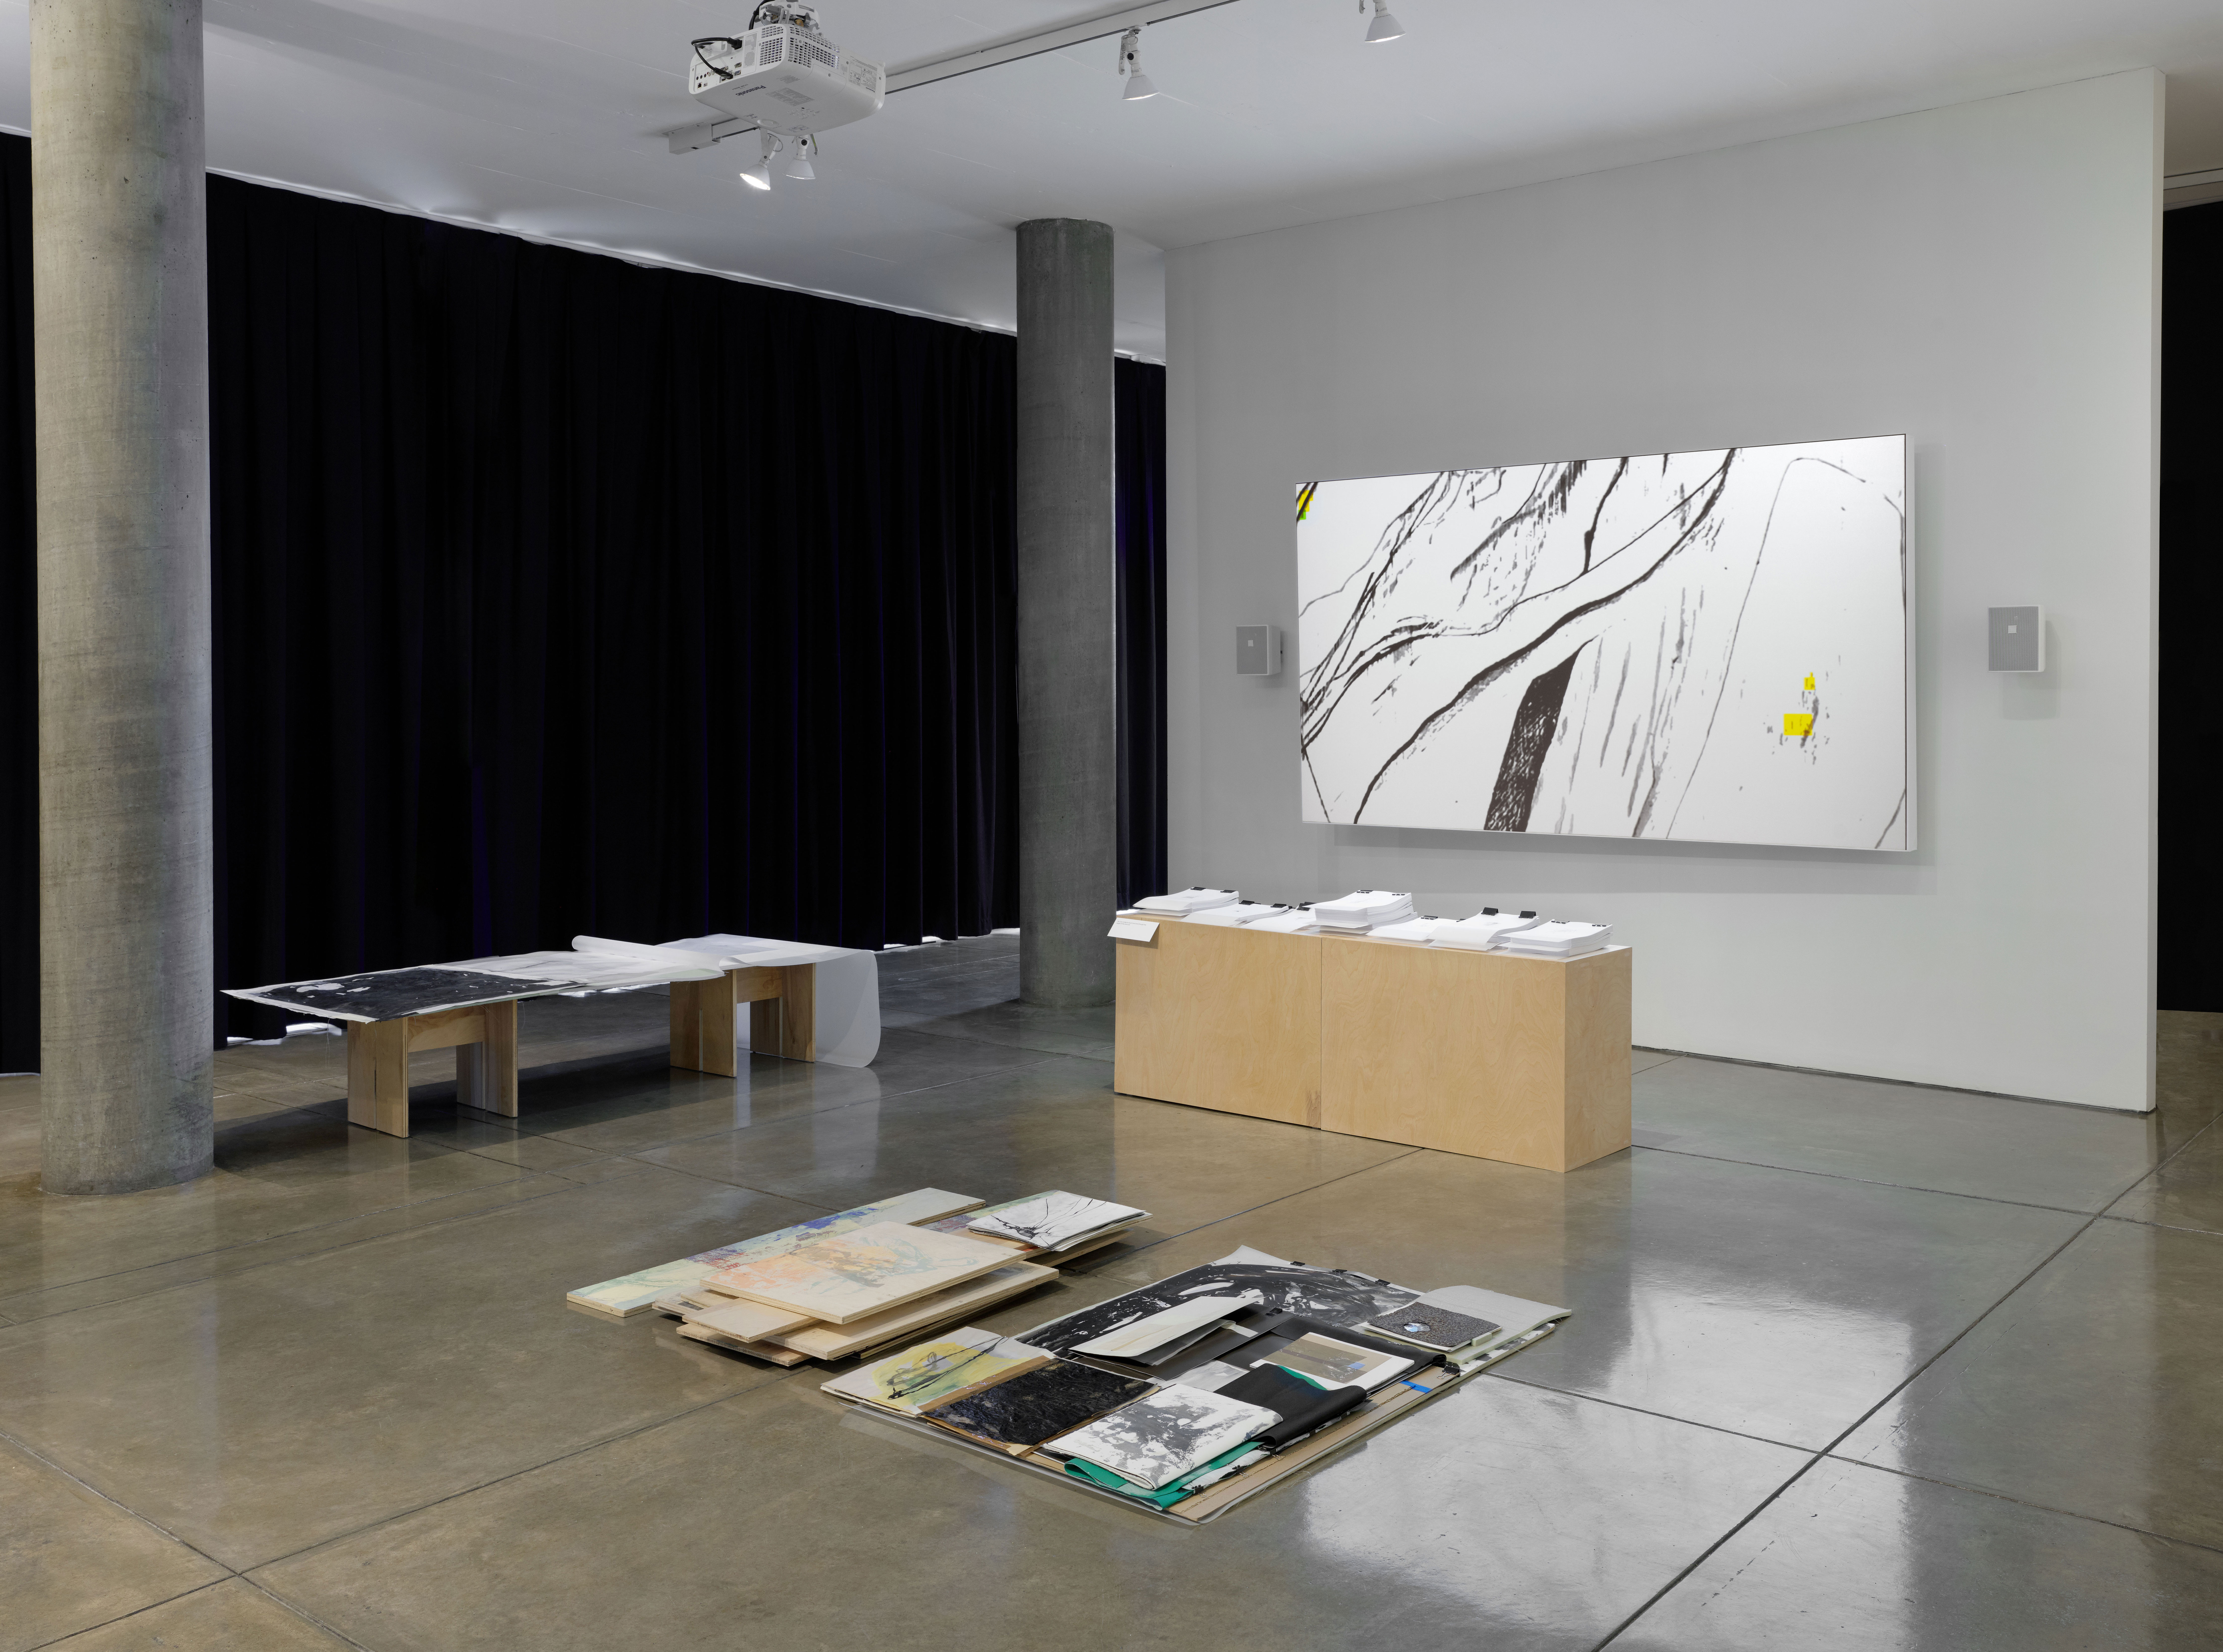 Photograph of an art installation by artist Caroline Coolidge with a projected screen in the back with abstract black, white, and yellow lines forming the background, and mixed media artworks across two tables and the concrete floor.